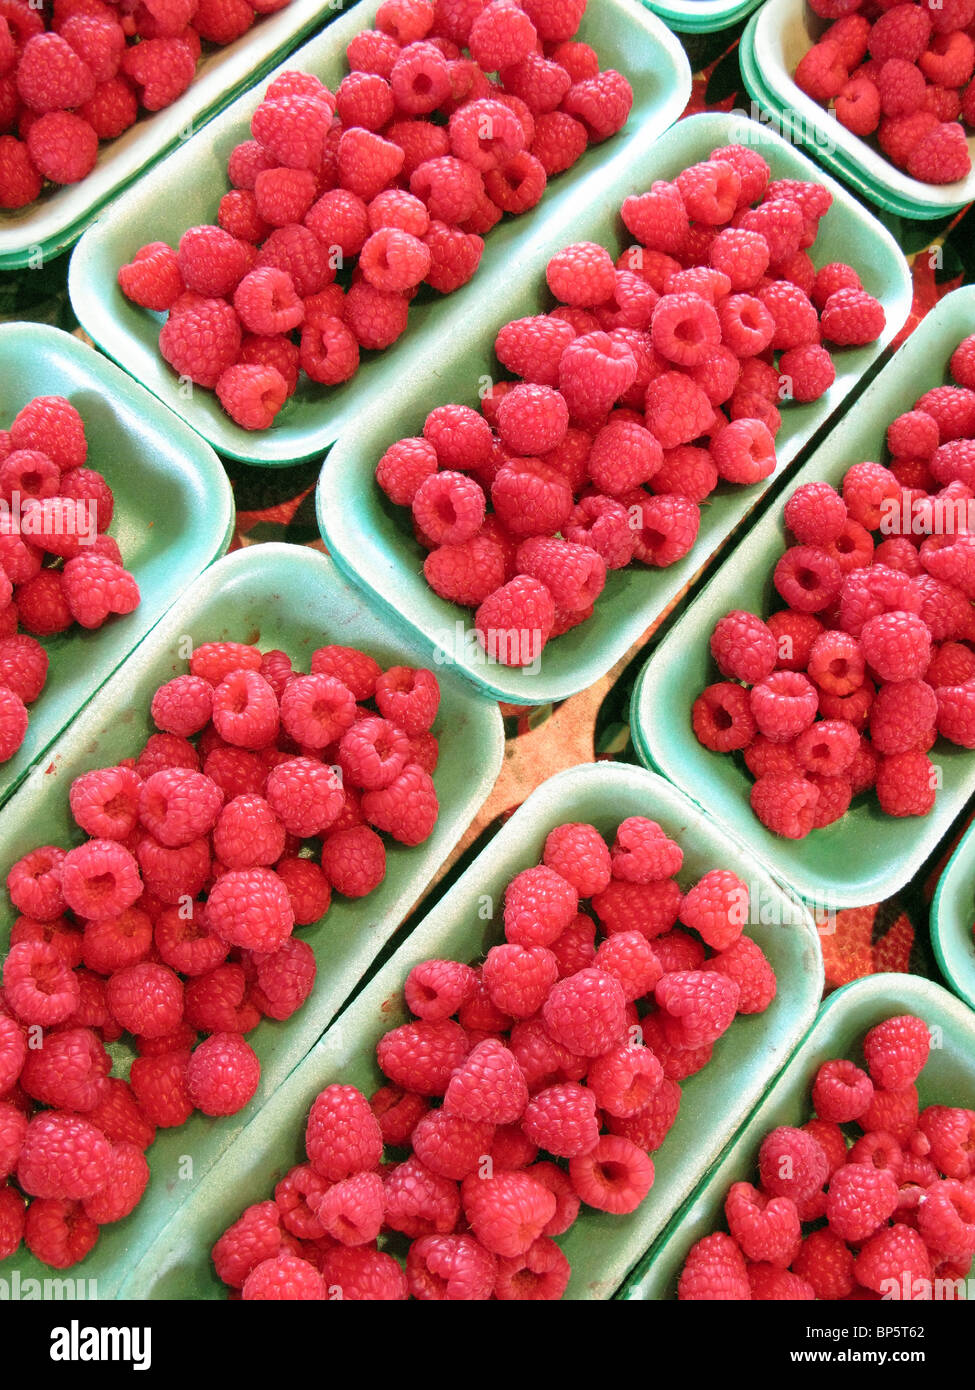 A collection of trays with fresh farmer's market red raspberries Stock Photo